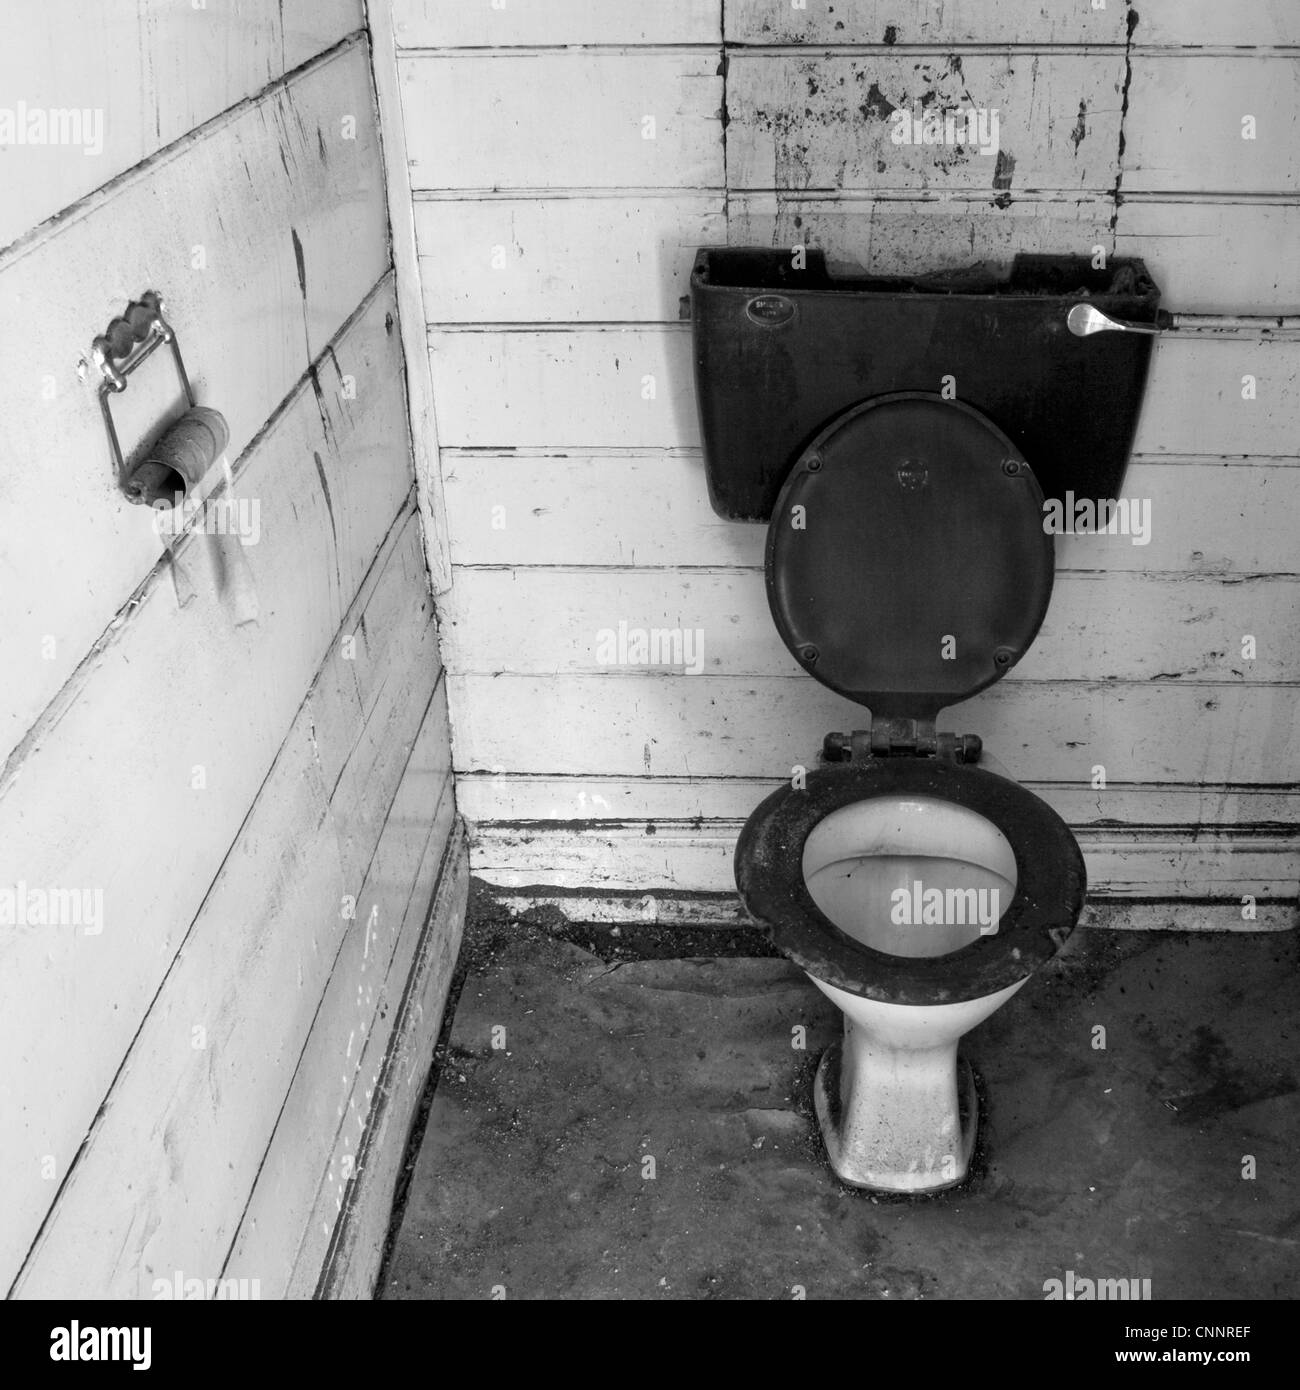 An old, unused, derelict toilet, water closet or WC, left to decay. Stock Photo